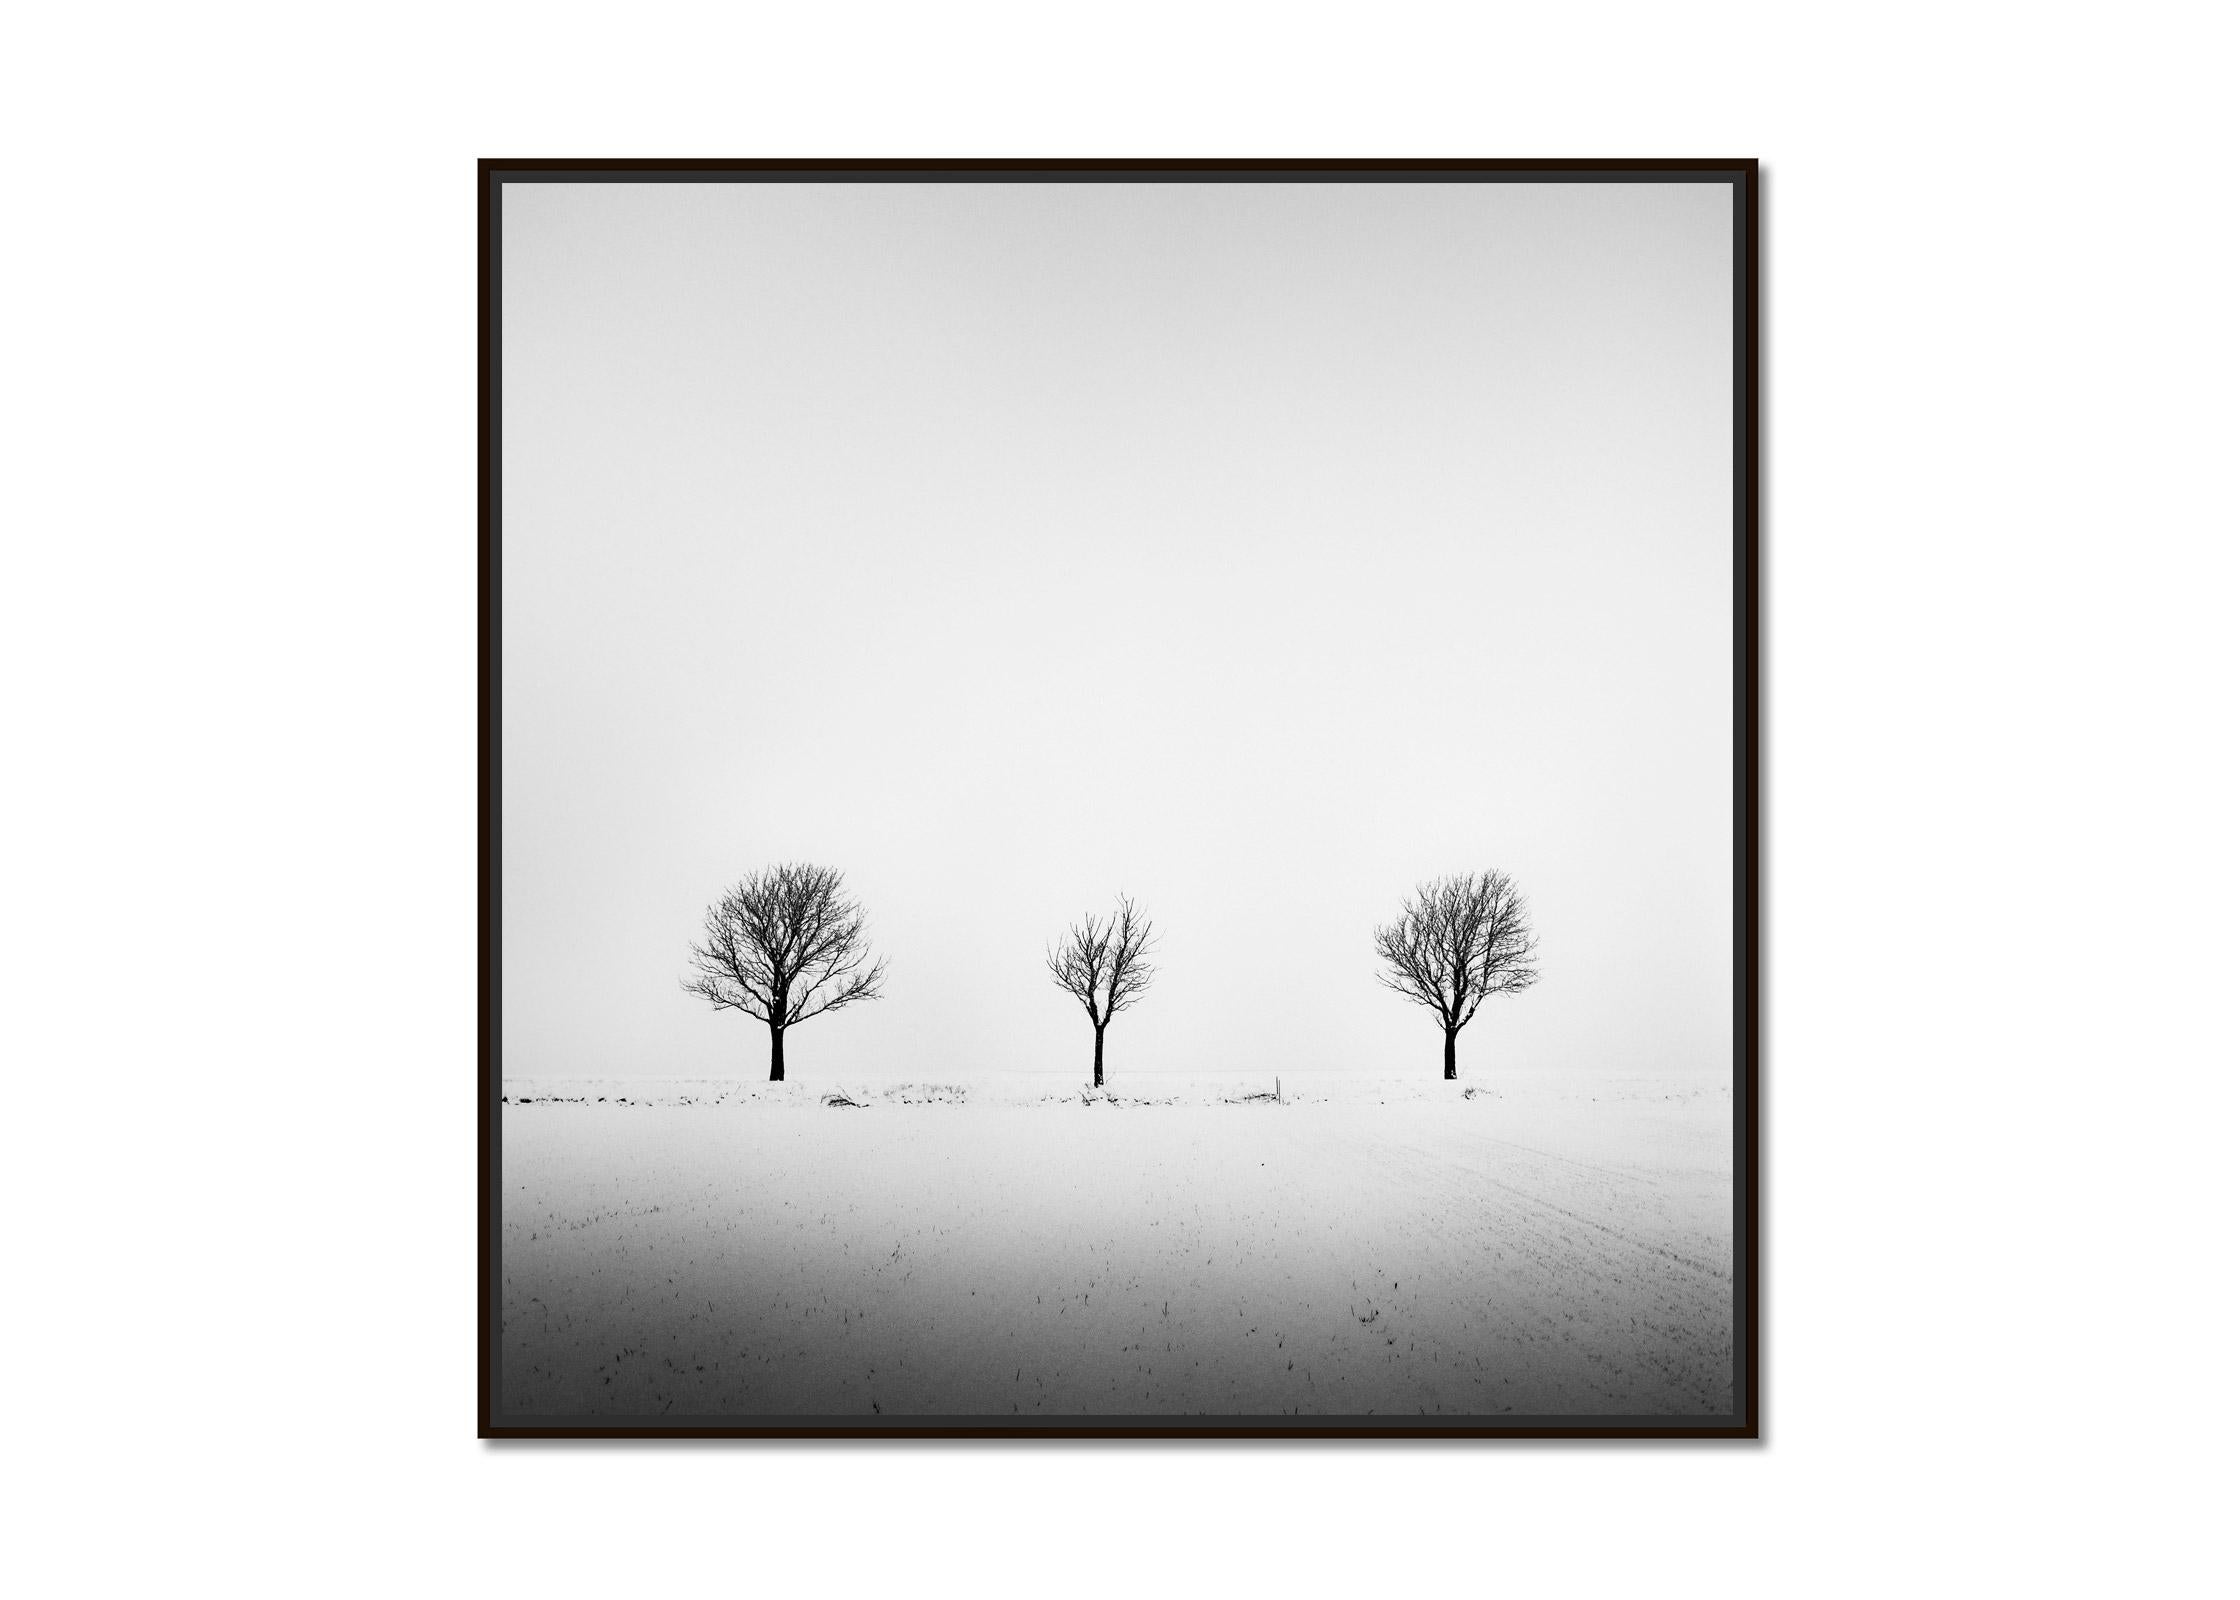 Trees in snowy Field, minimal art, black and white photography, landscape - Photograph by Gerald Berghammer